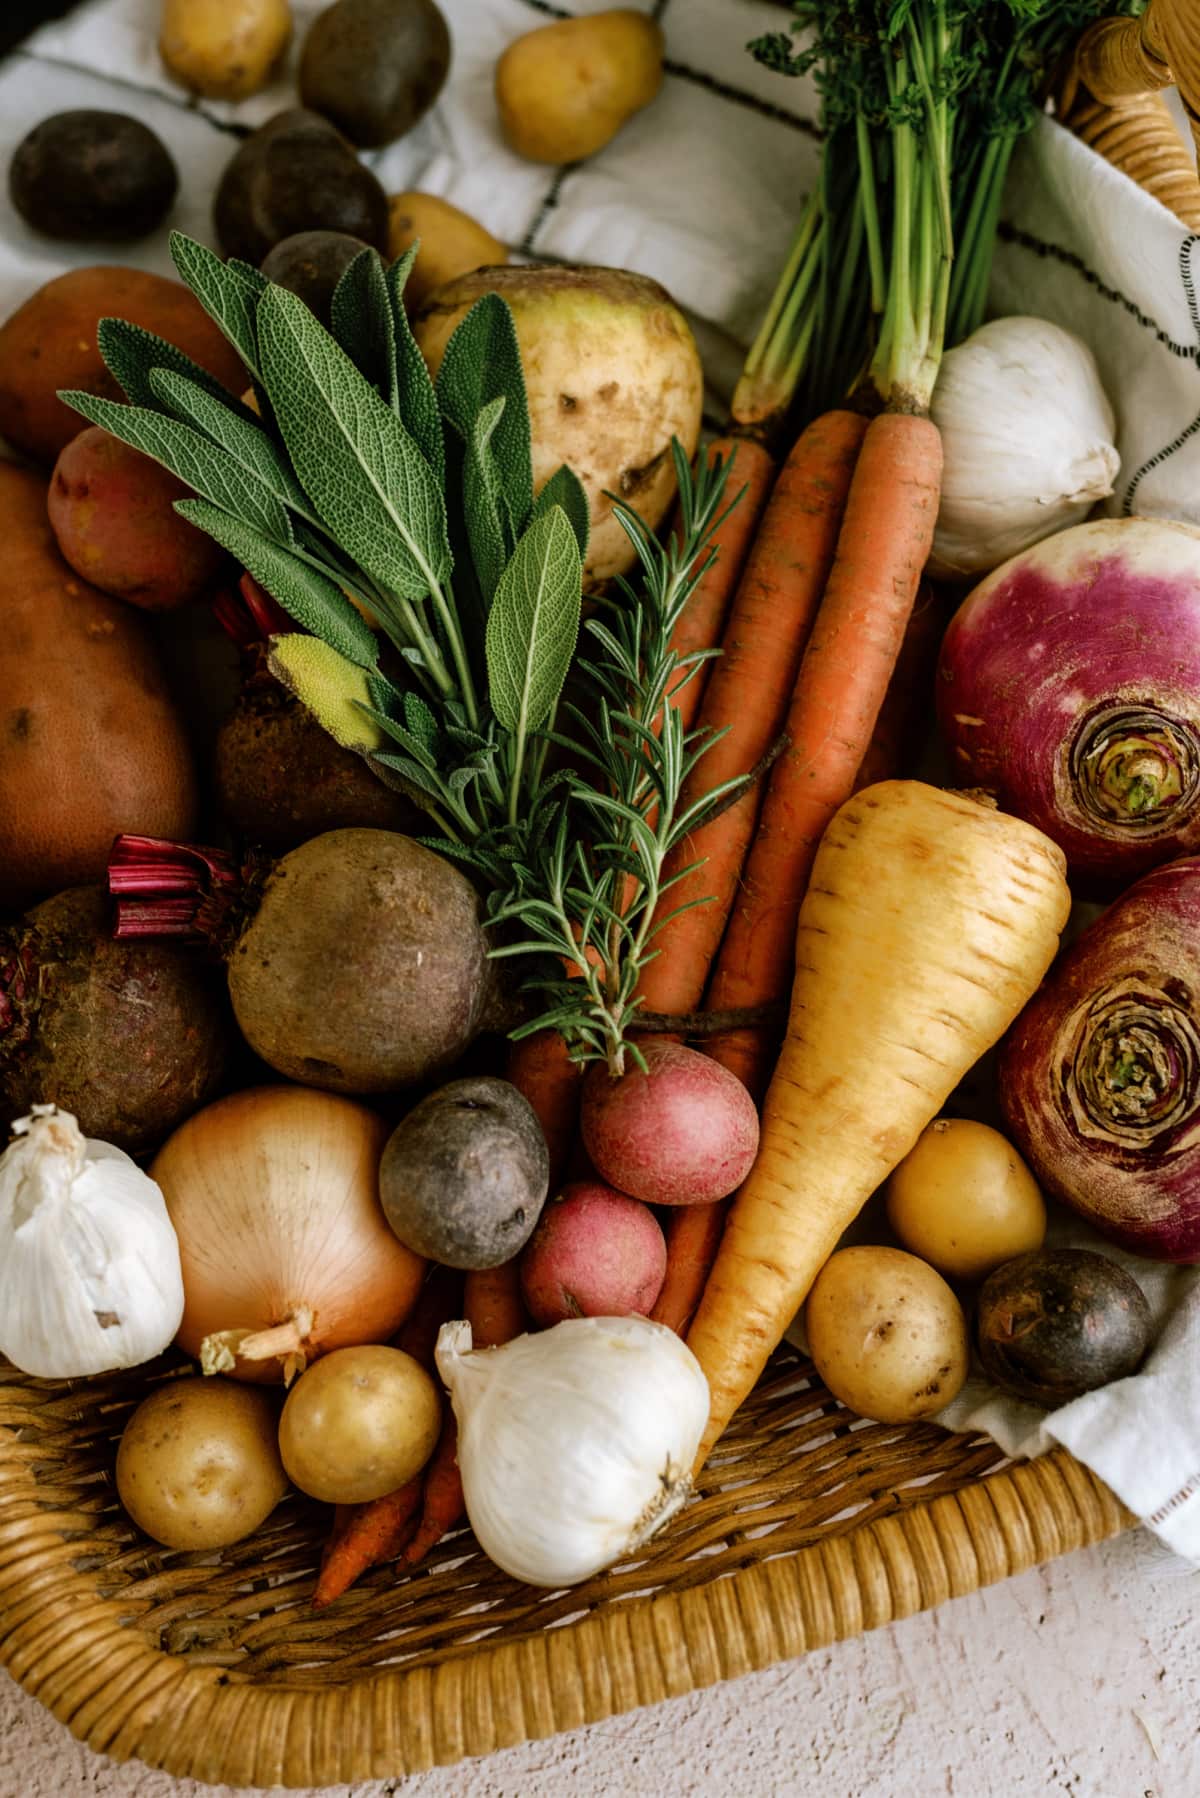 raw root vegetables on basket tray